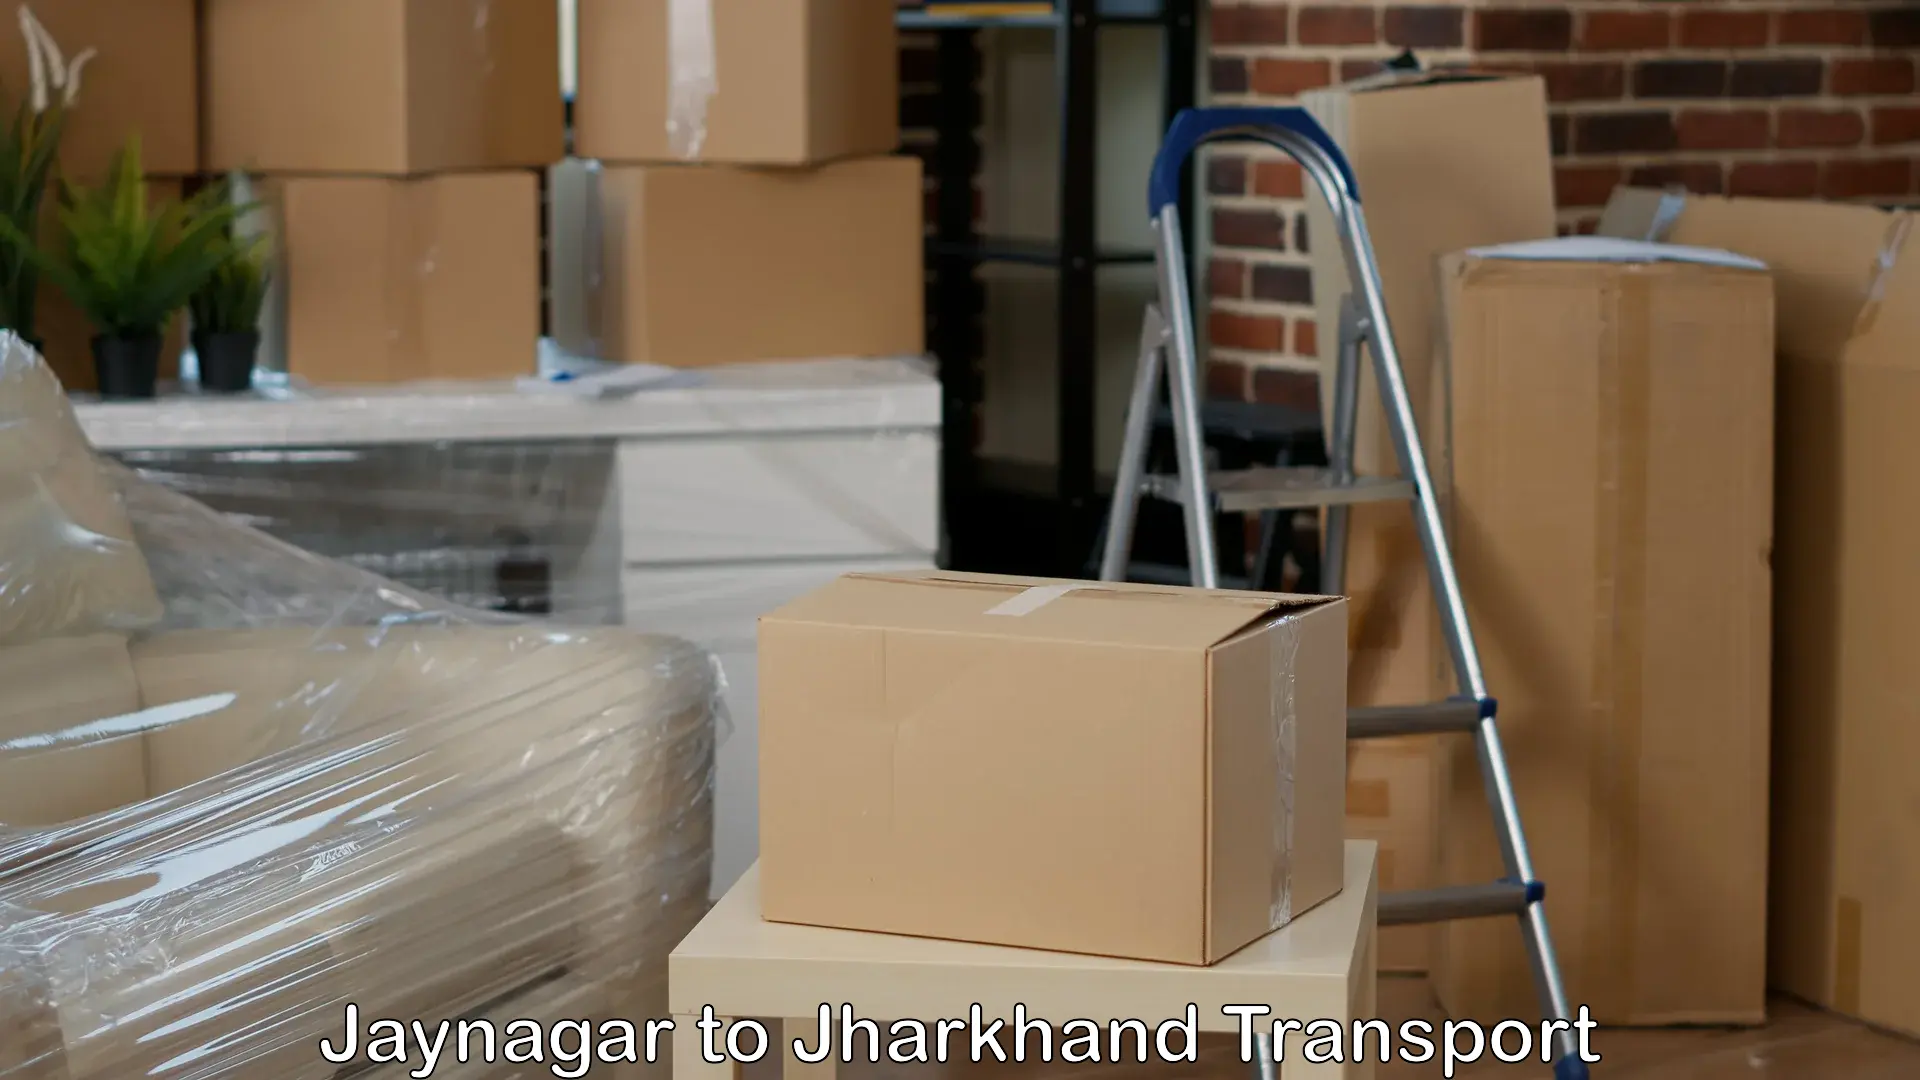 Air freight transport services in Jaynagar to Kedla